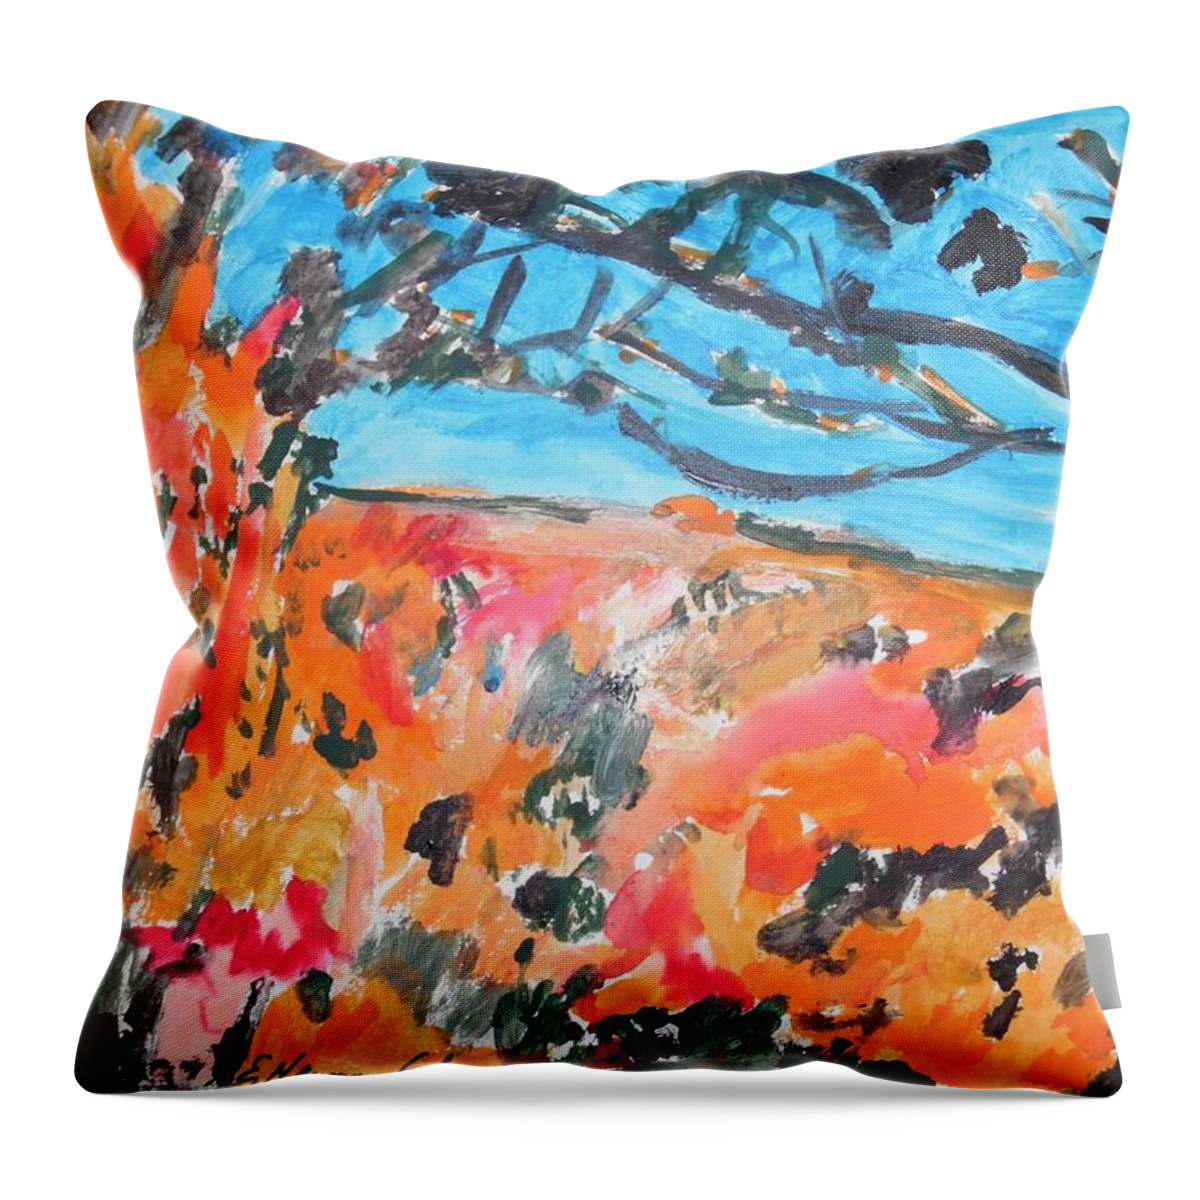 Autumn Flames Throw Pillow featuring the painting Autumn Flames by Esther Newman-Cohen